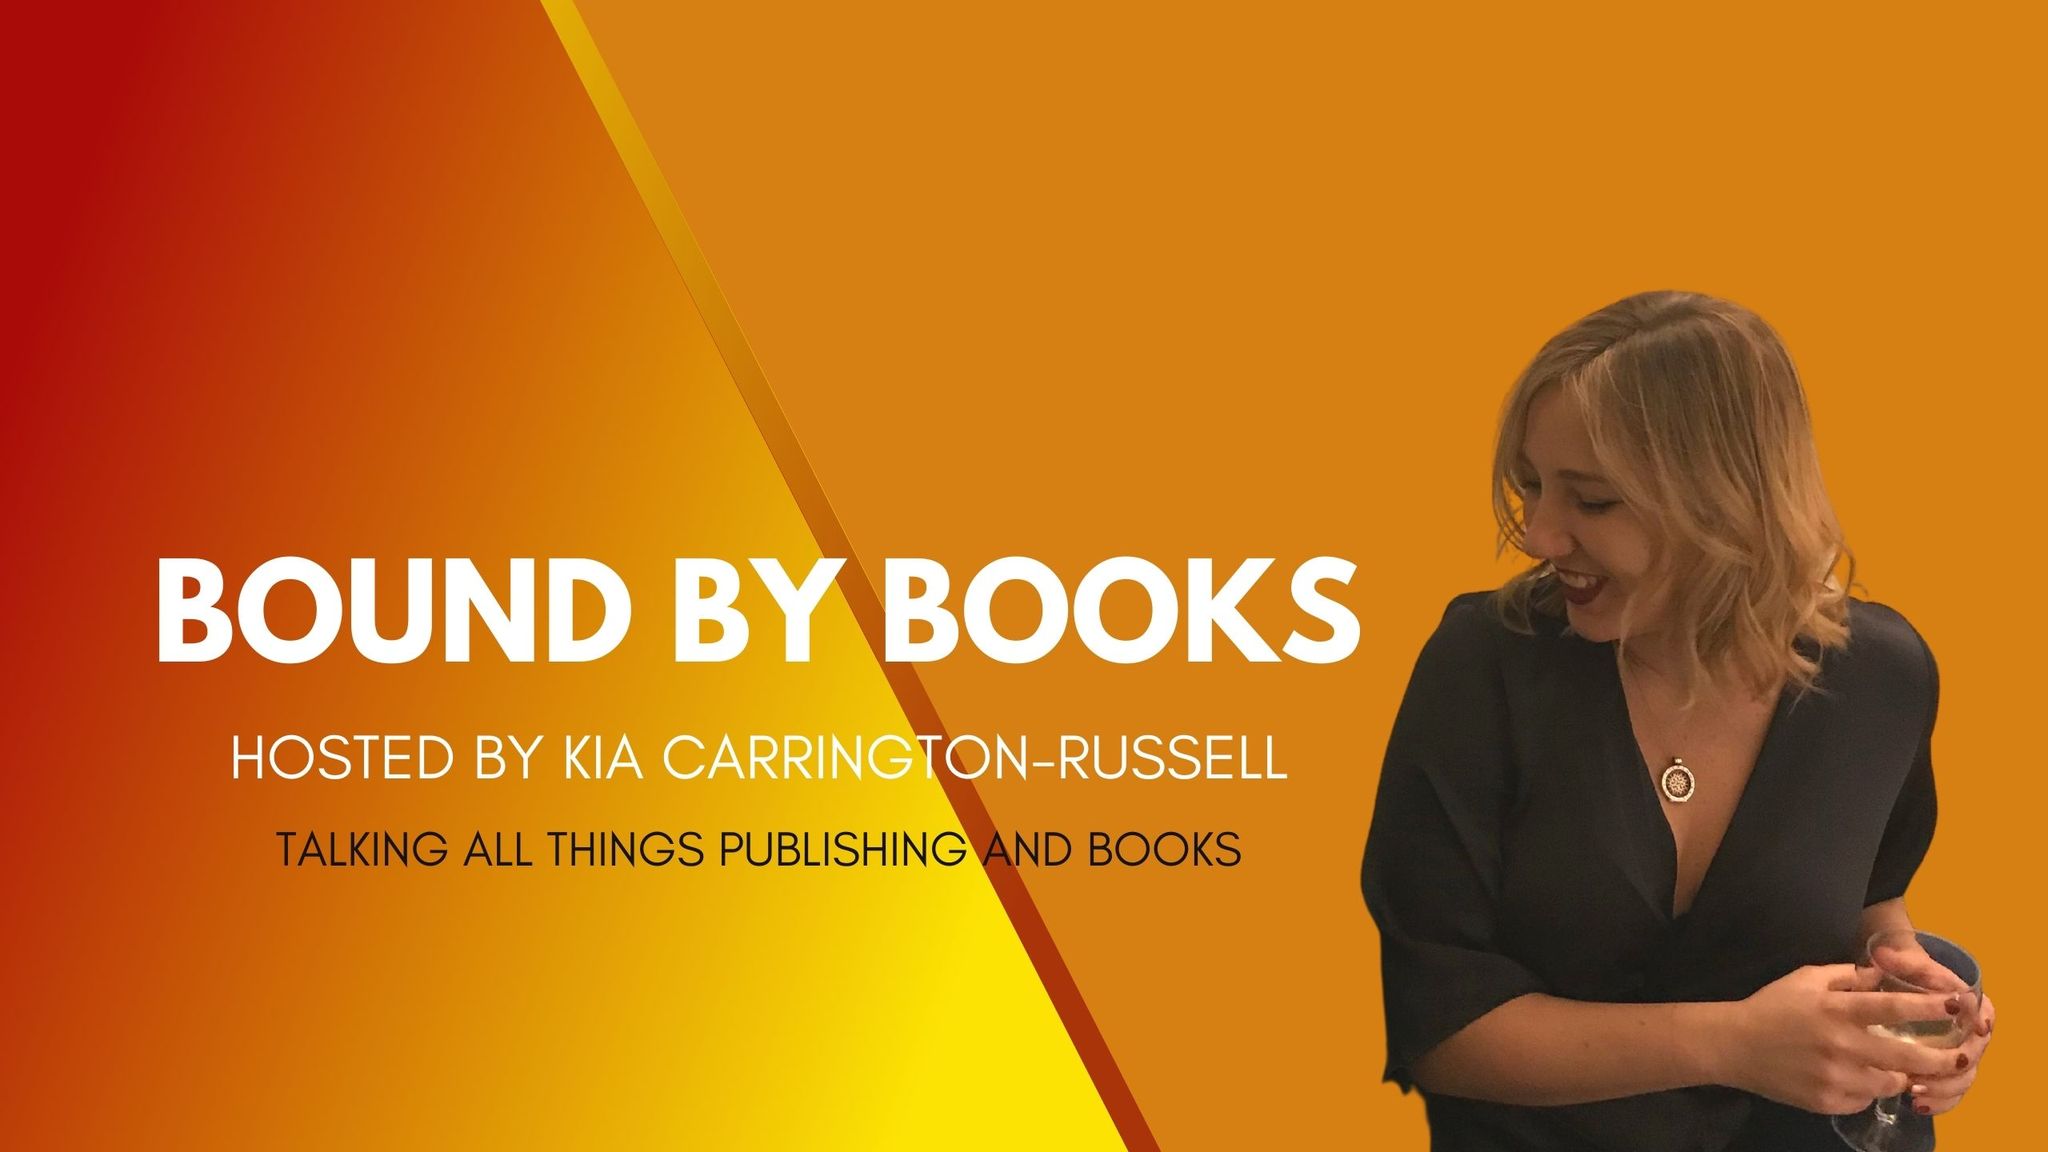 Bound by Books - Kia Carrington-Russell